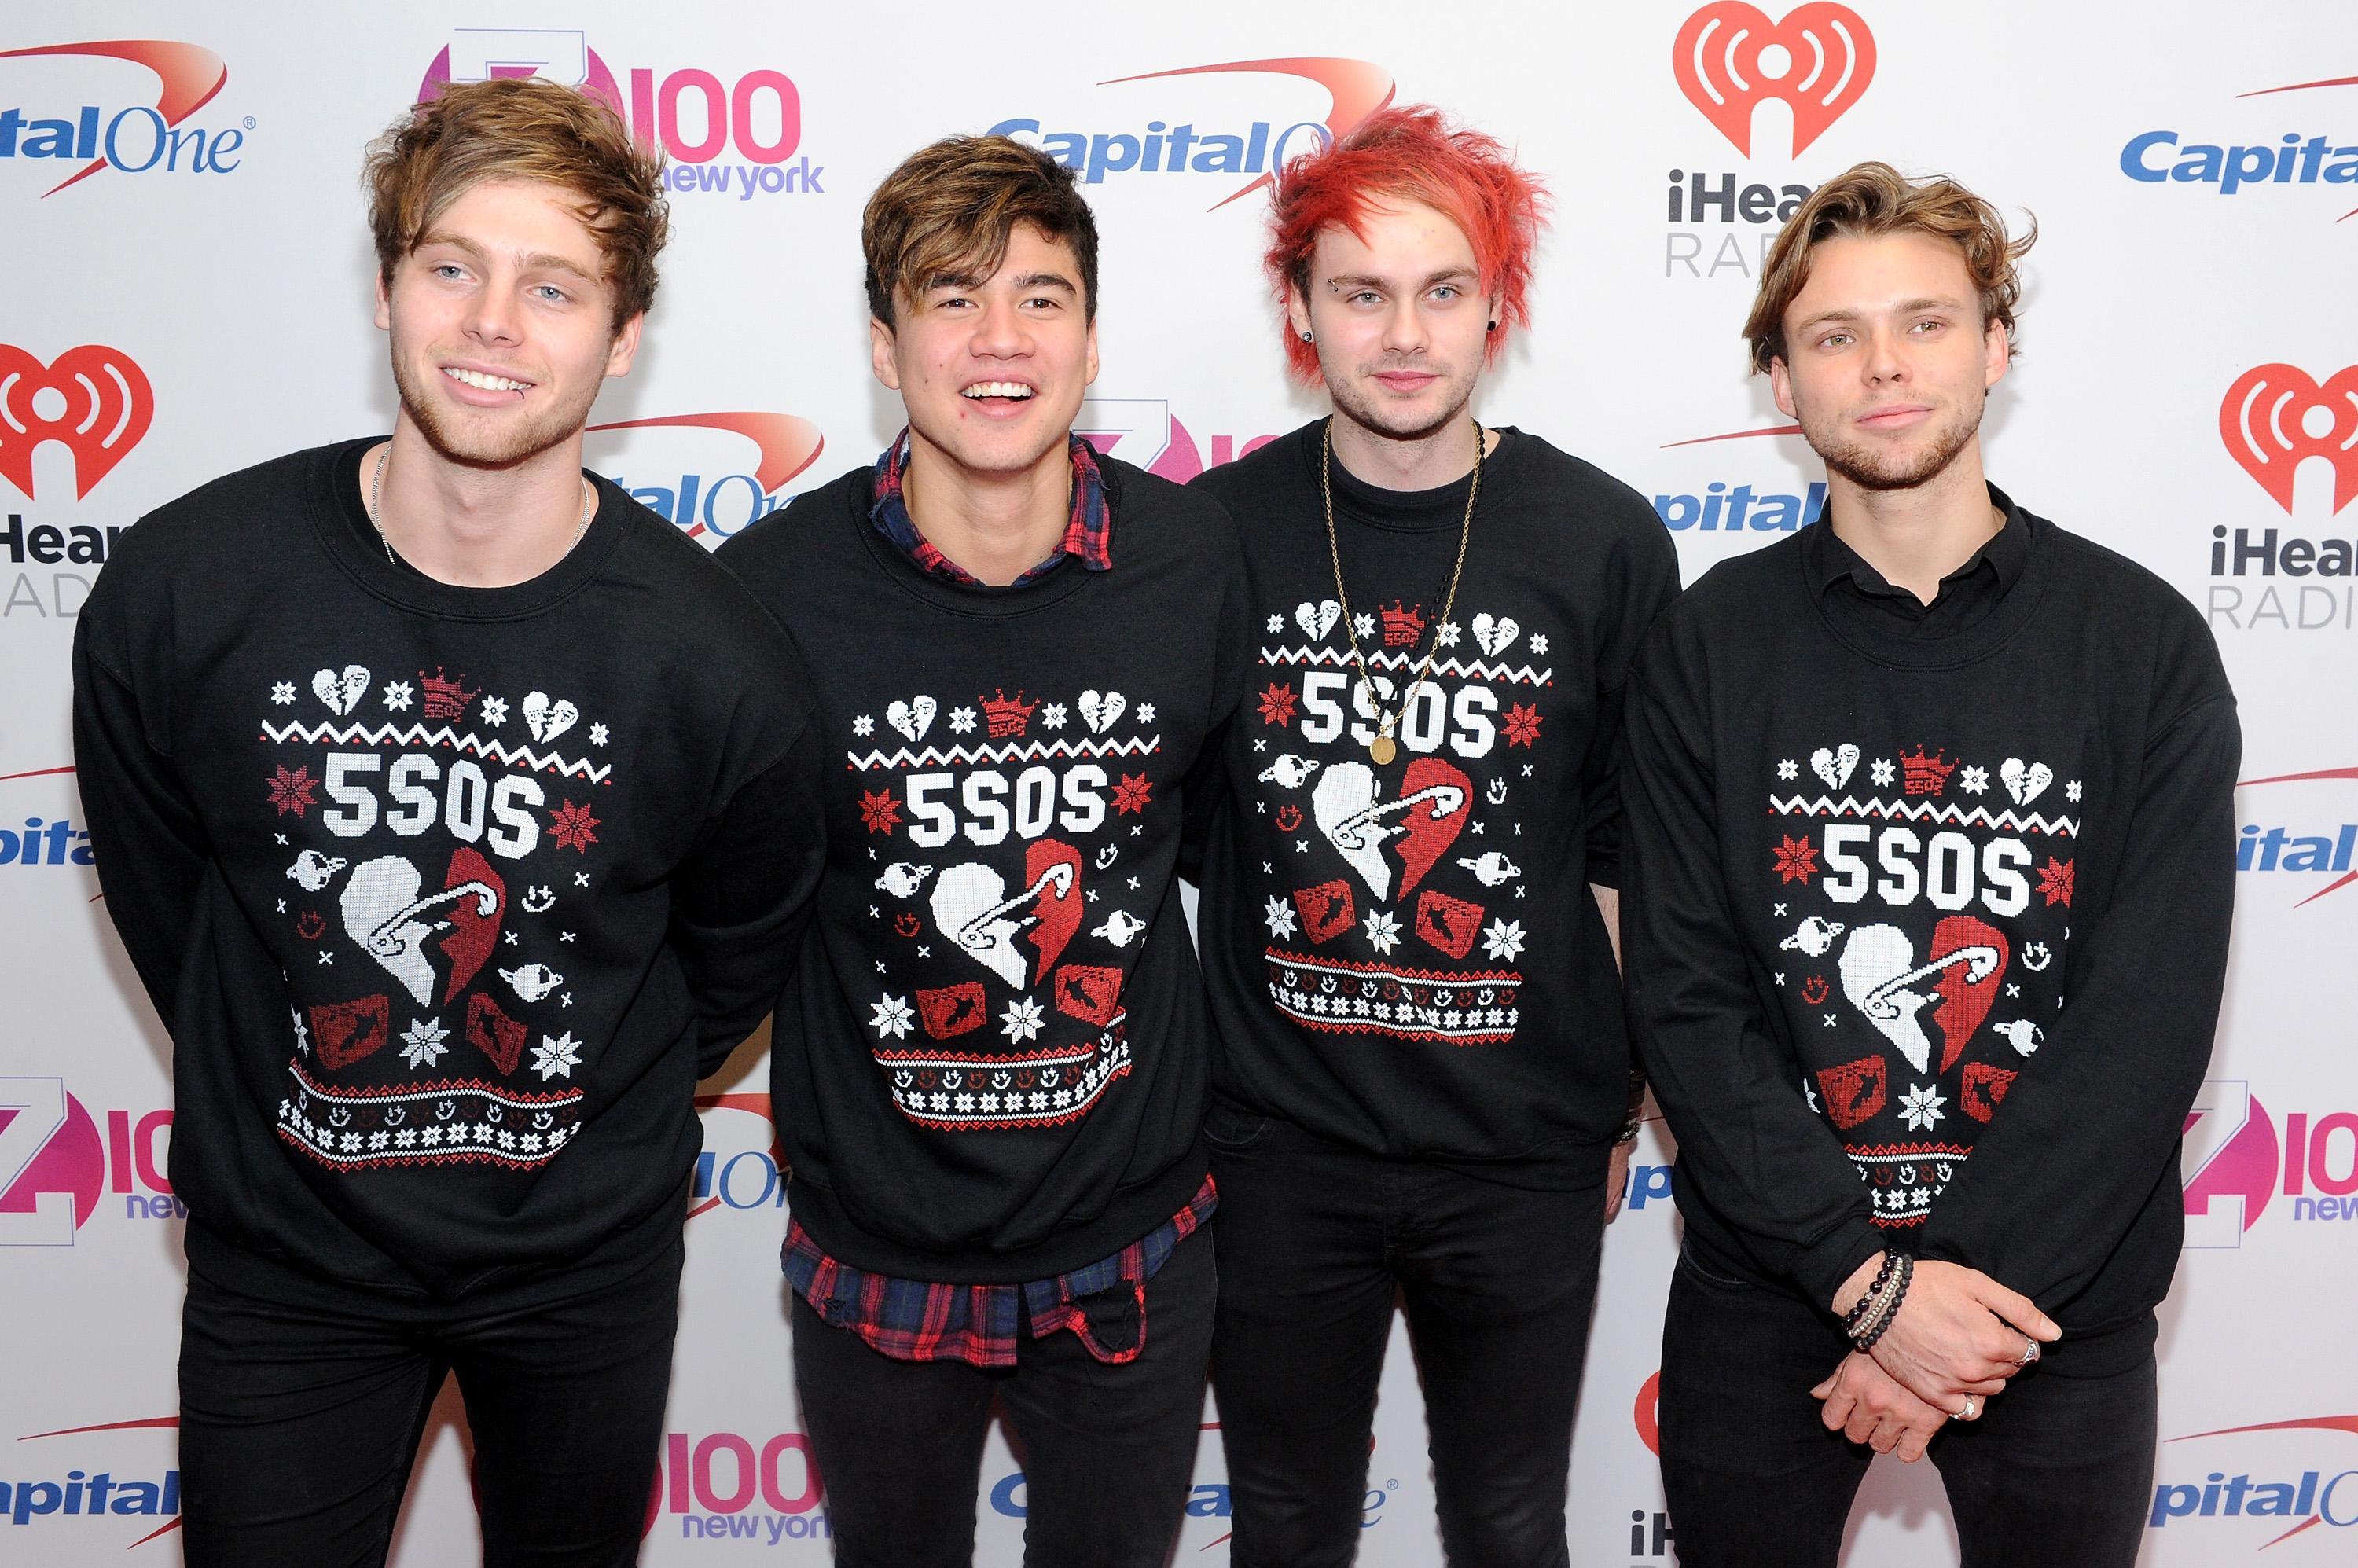 Crazy Things Five Seconds Of Summer's 'Rolling Stone' Story Revealed